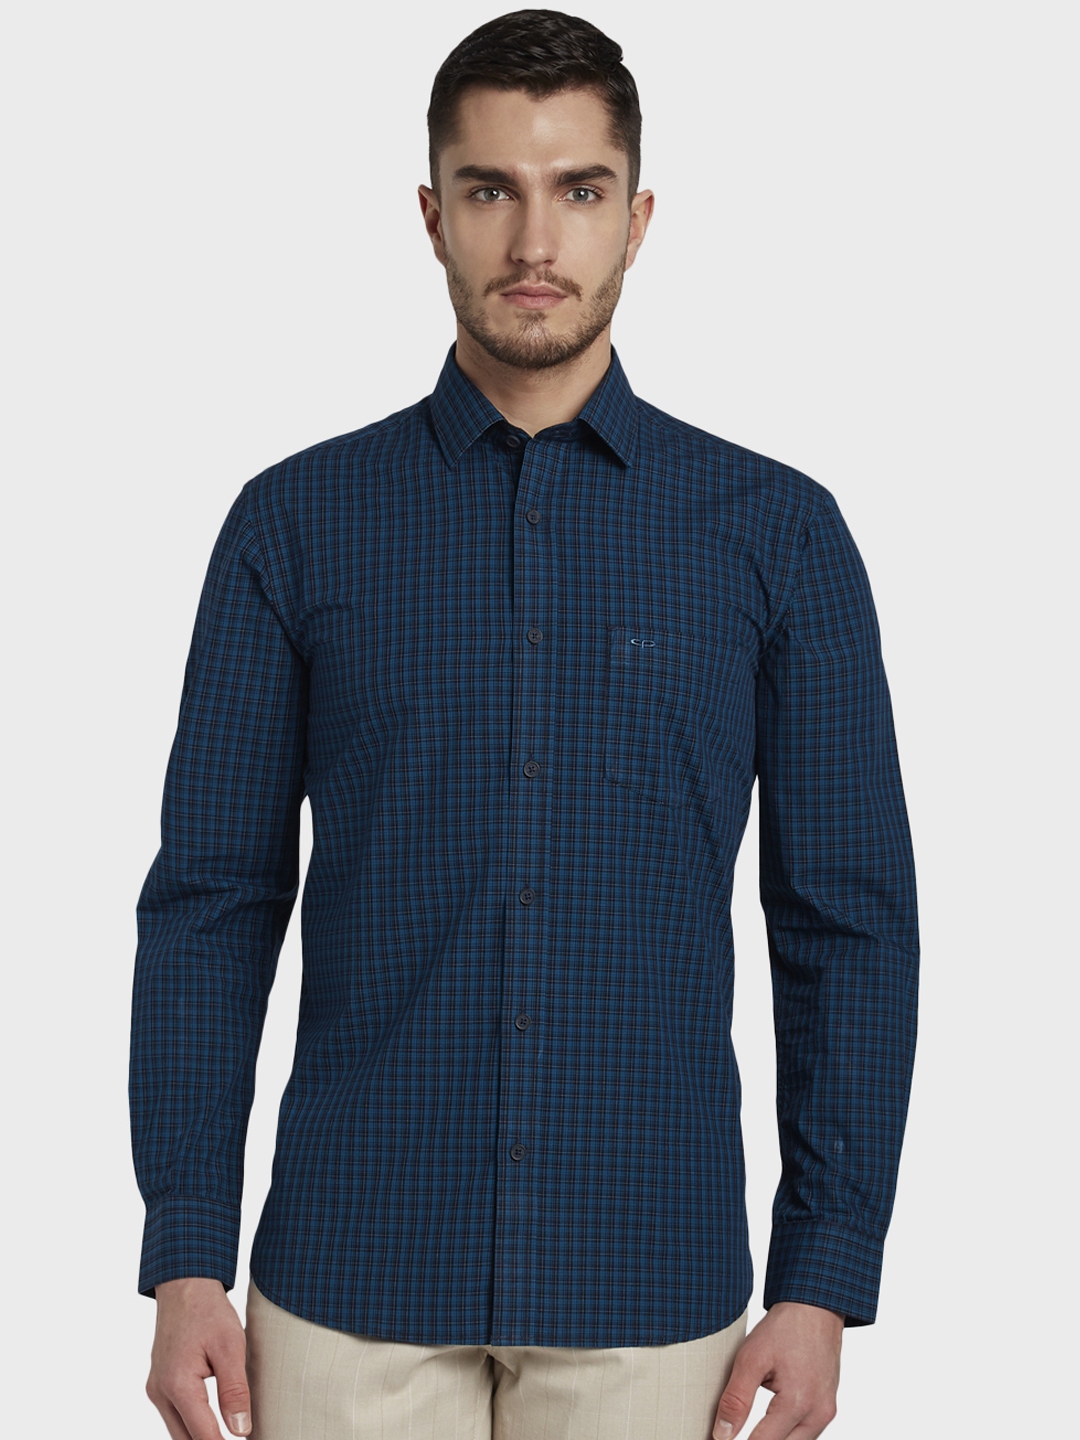 Buy ColorPlus Men Blue & Black Tailored Fit Checked Casual Shirt ...